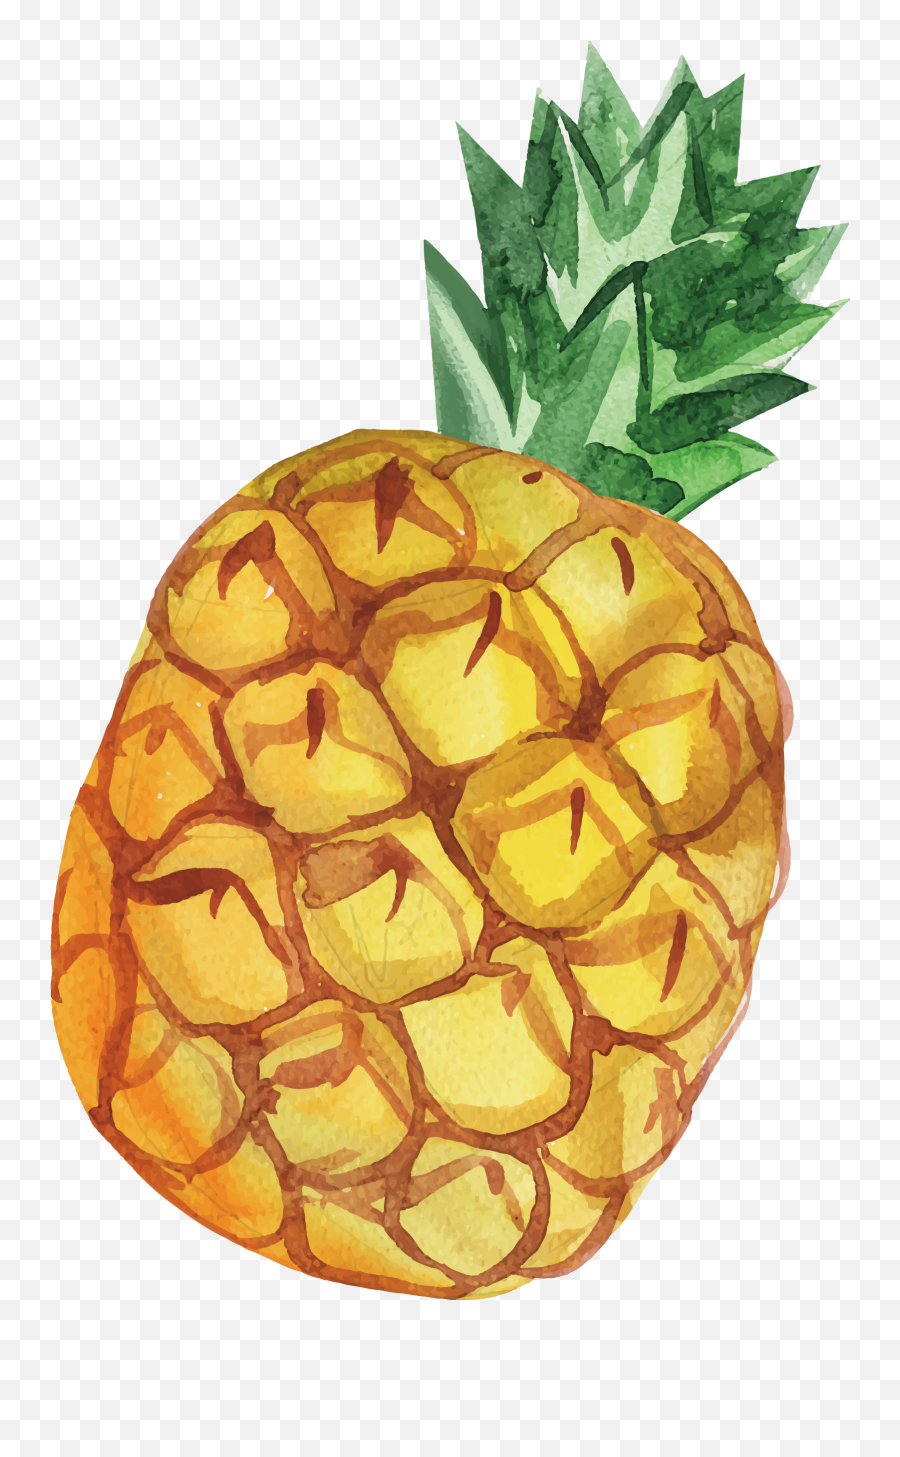 Download Hd Pineapple Transparent Png Image - Nicepngcom Fresh Emoji,Pineapple Transparent